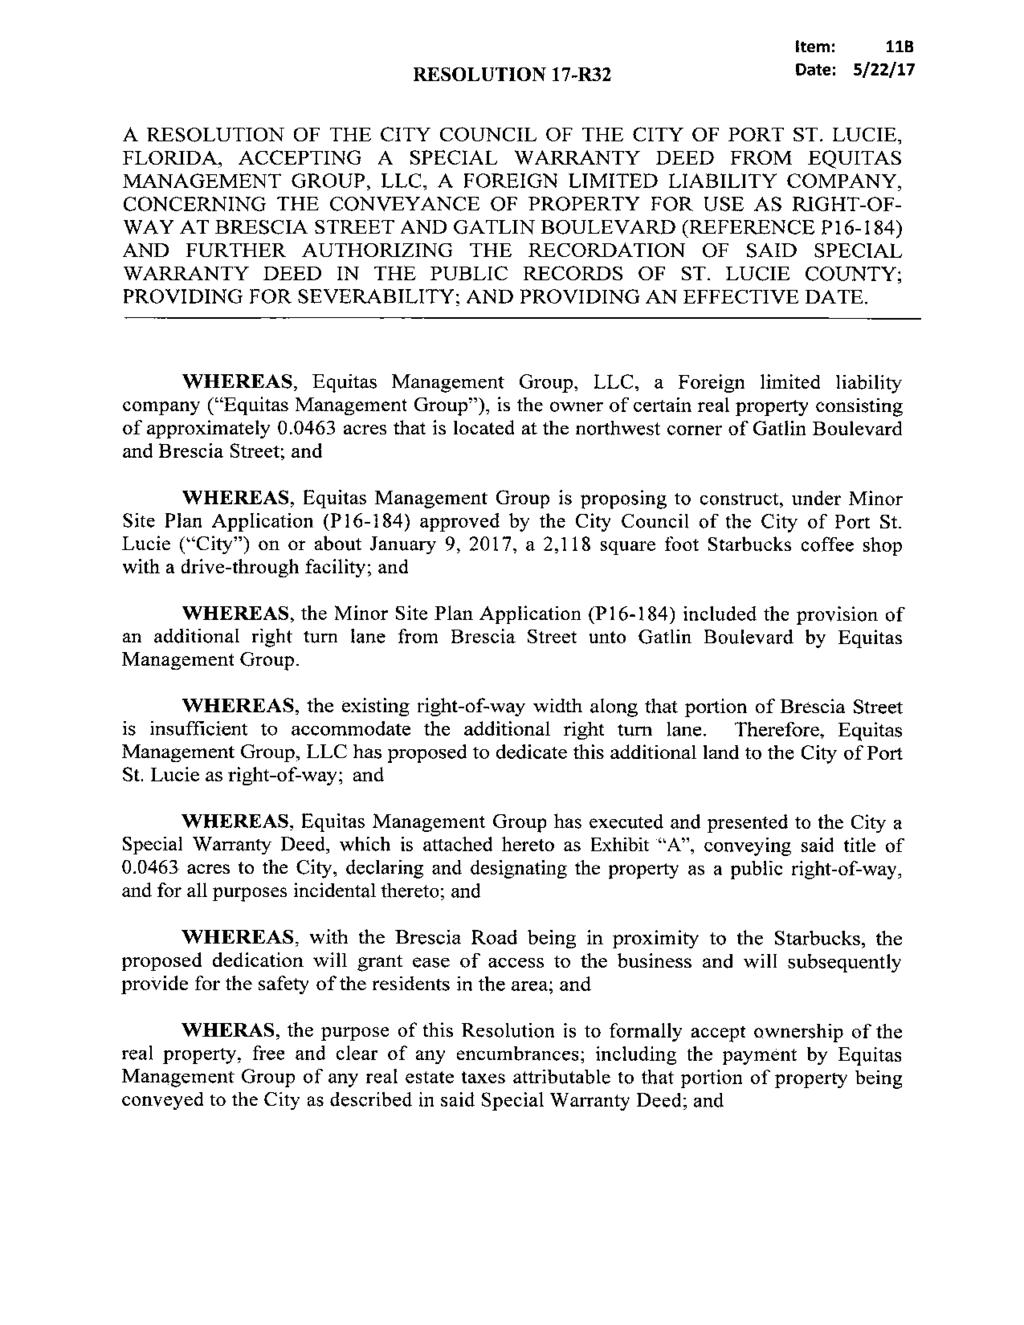 RESOLUTION 17-R32 Item: 11B Date: 5/22/17 A RESOLUTION OF THE CITY COUNCIL OF THE CITY OF PORT ST.